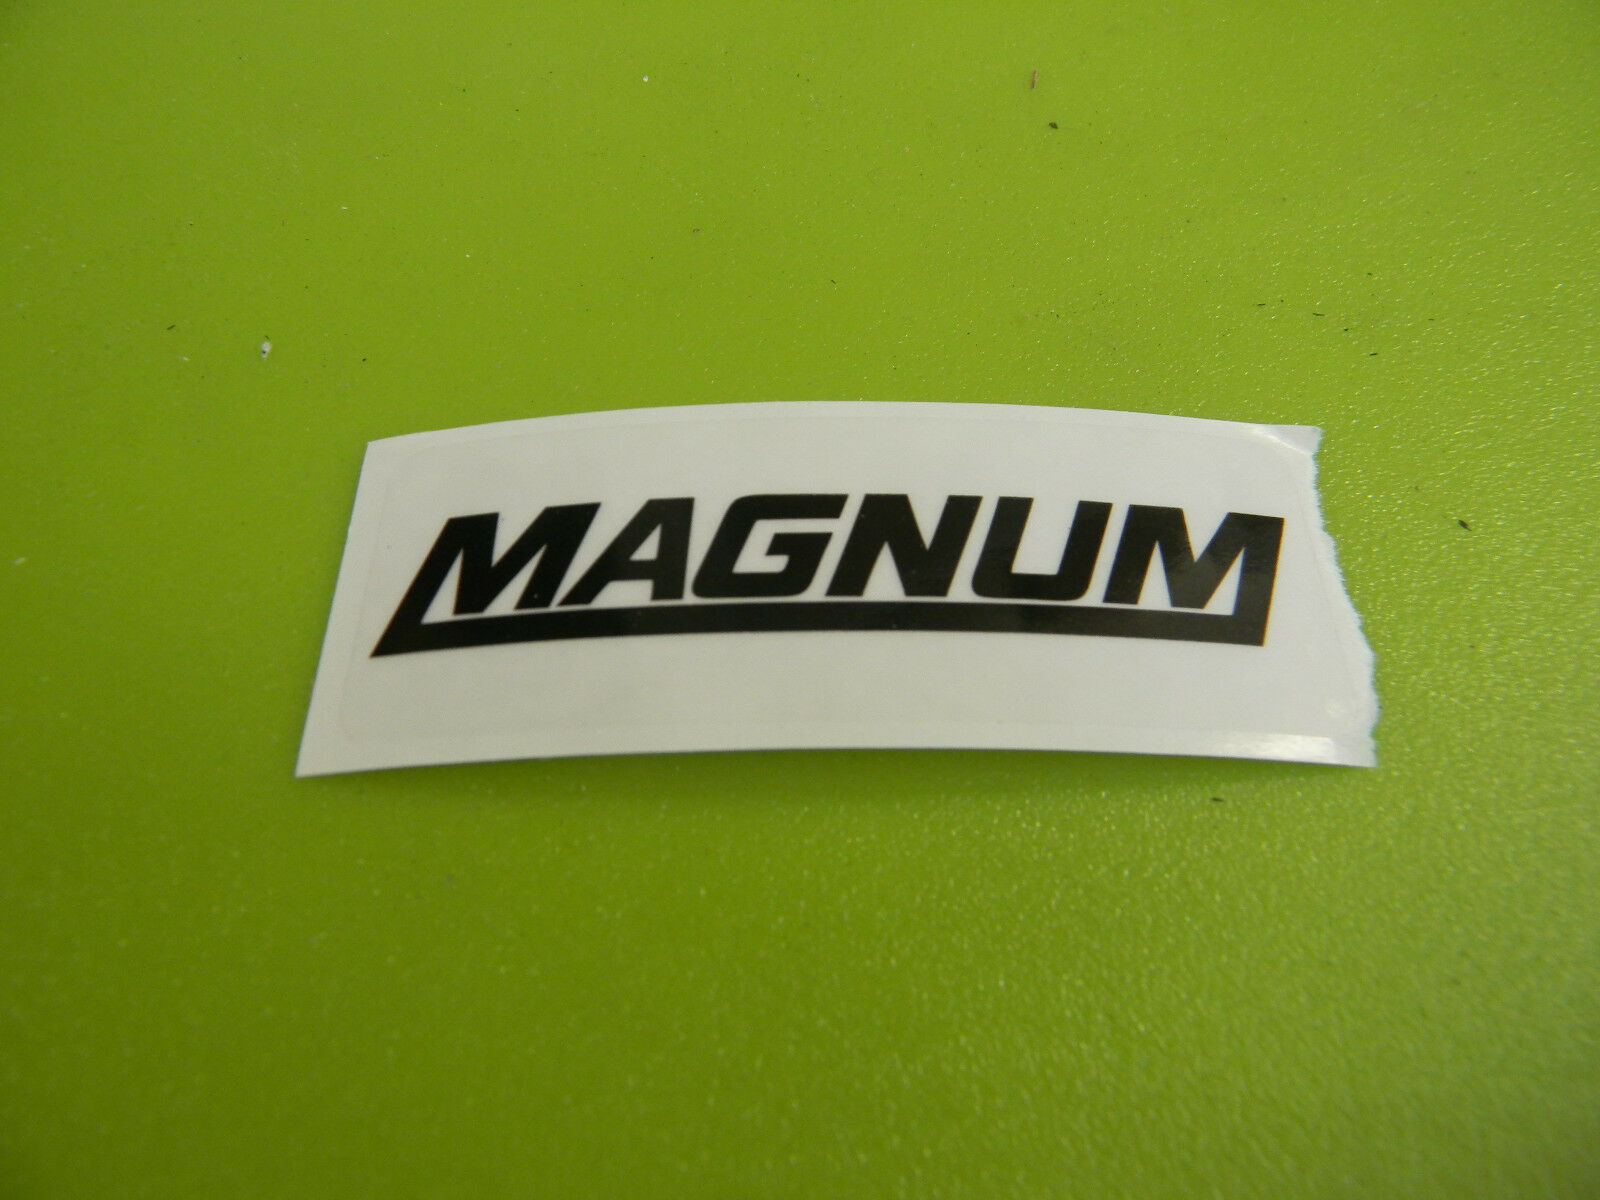 MAGNUM DECAL FOR STIHL CHAINSAW 046 MS440 066 MS660 BR600 0000-967-1593 - UP154